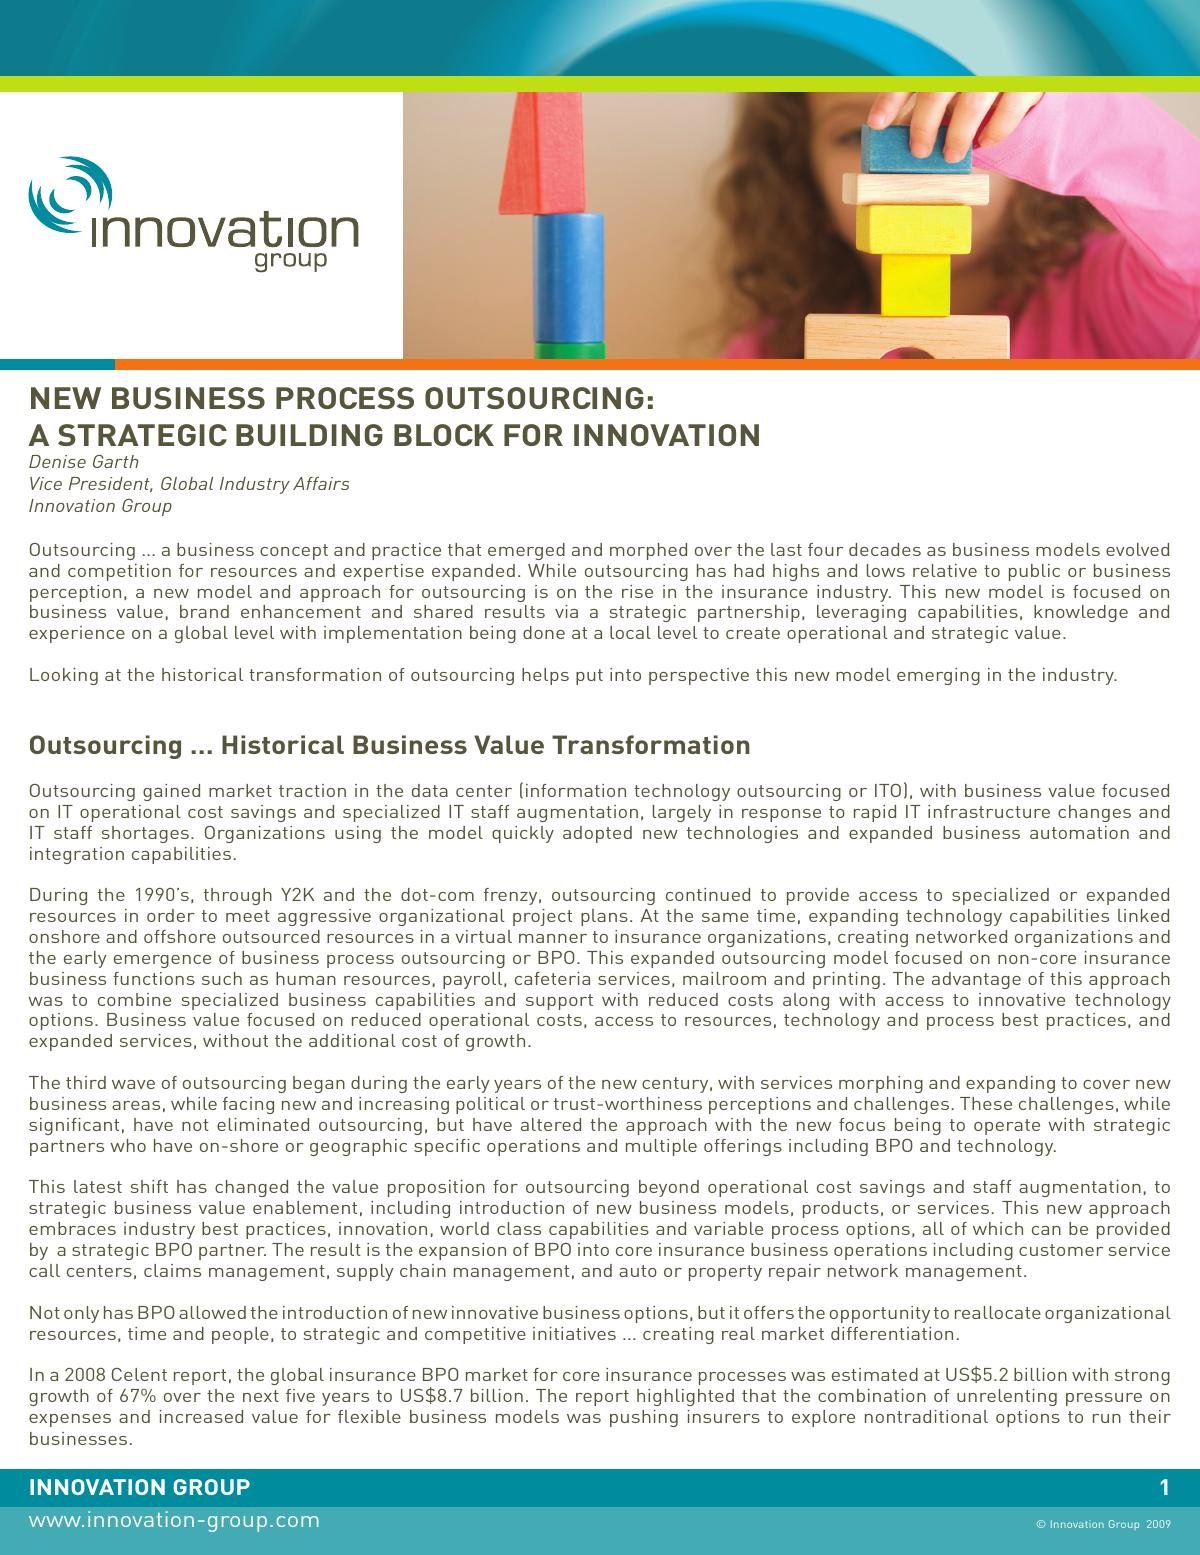 New Business Process Outsourcing: Strategic Building Block for Innovation